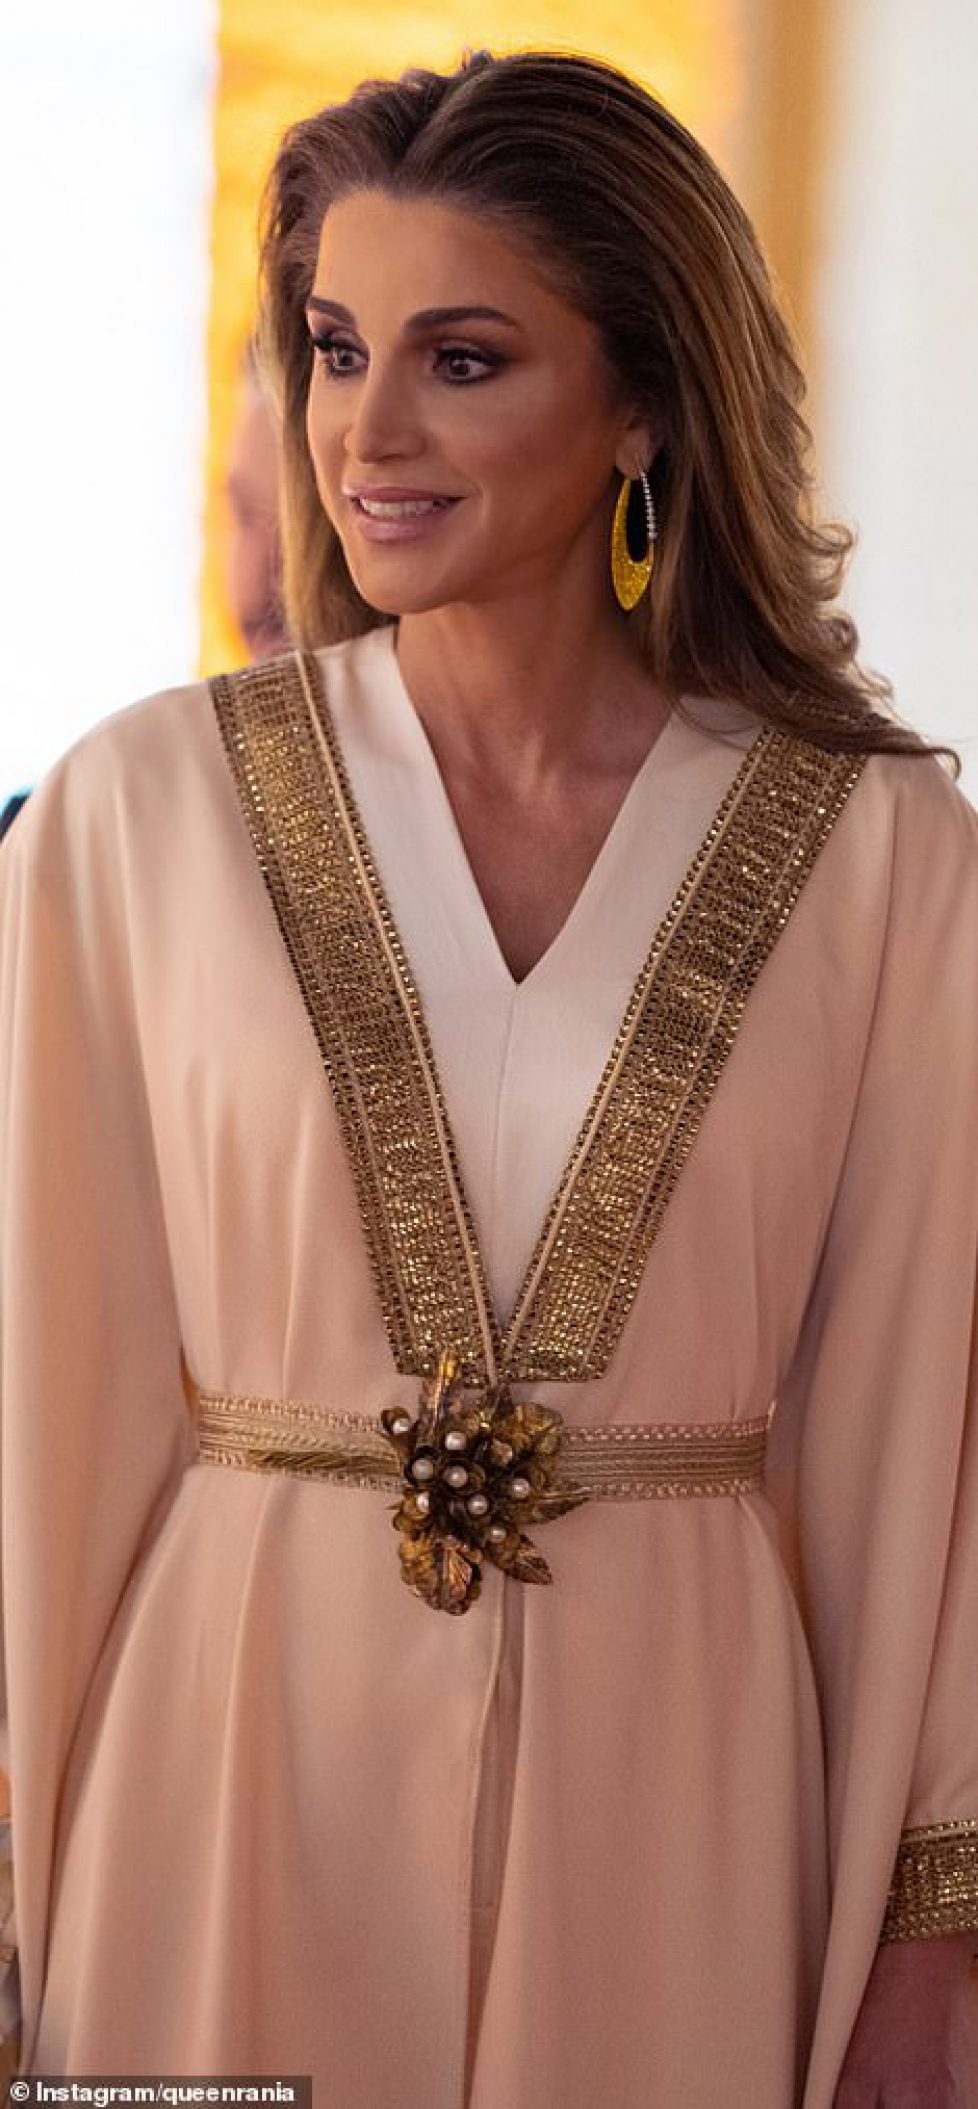 50602791-10211883-Queen_Rania_wore_a_cream_dress_with_gold_accessories-m-18_1637163938570